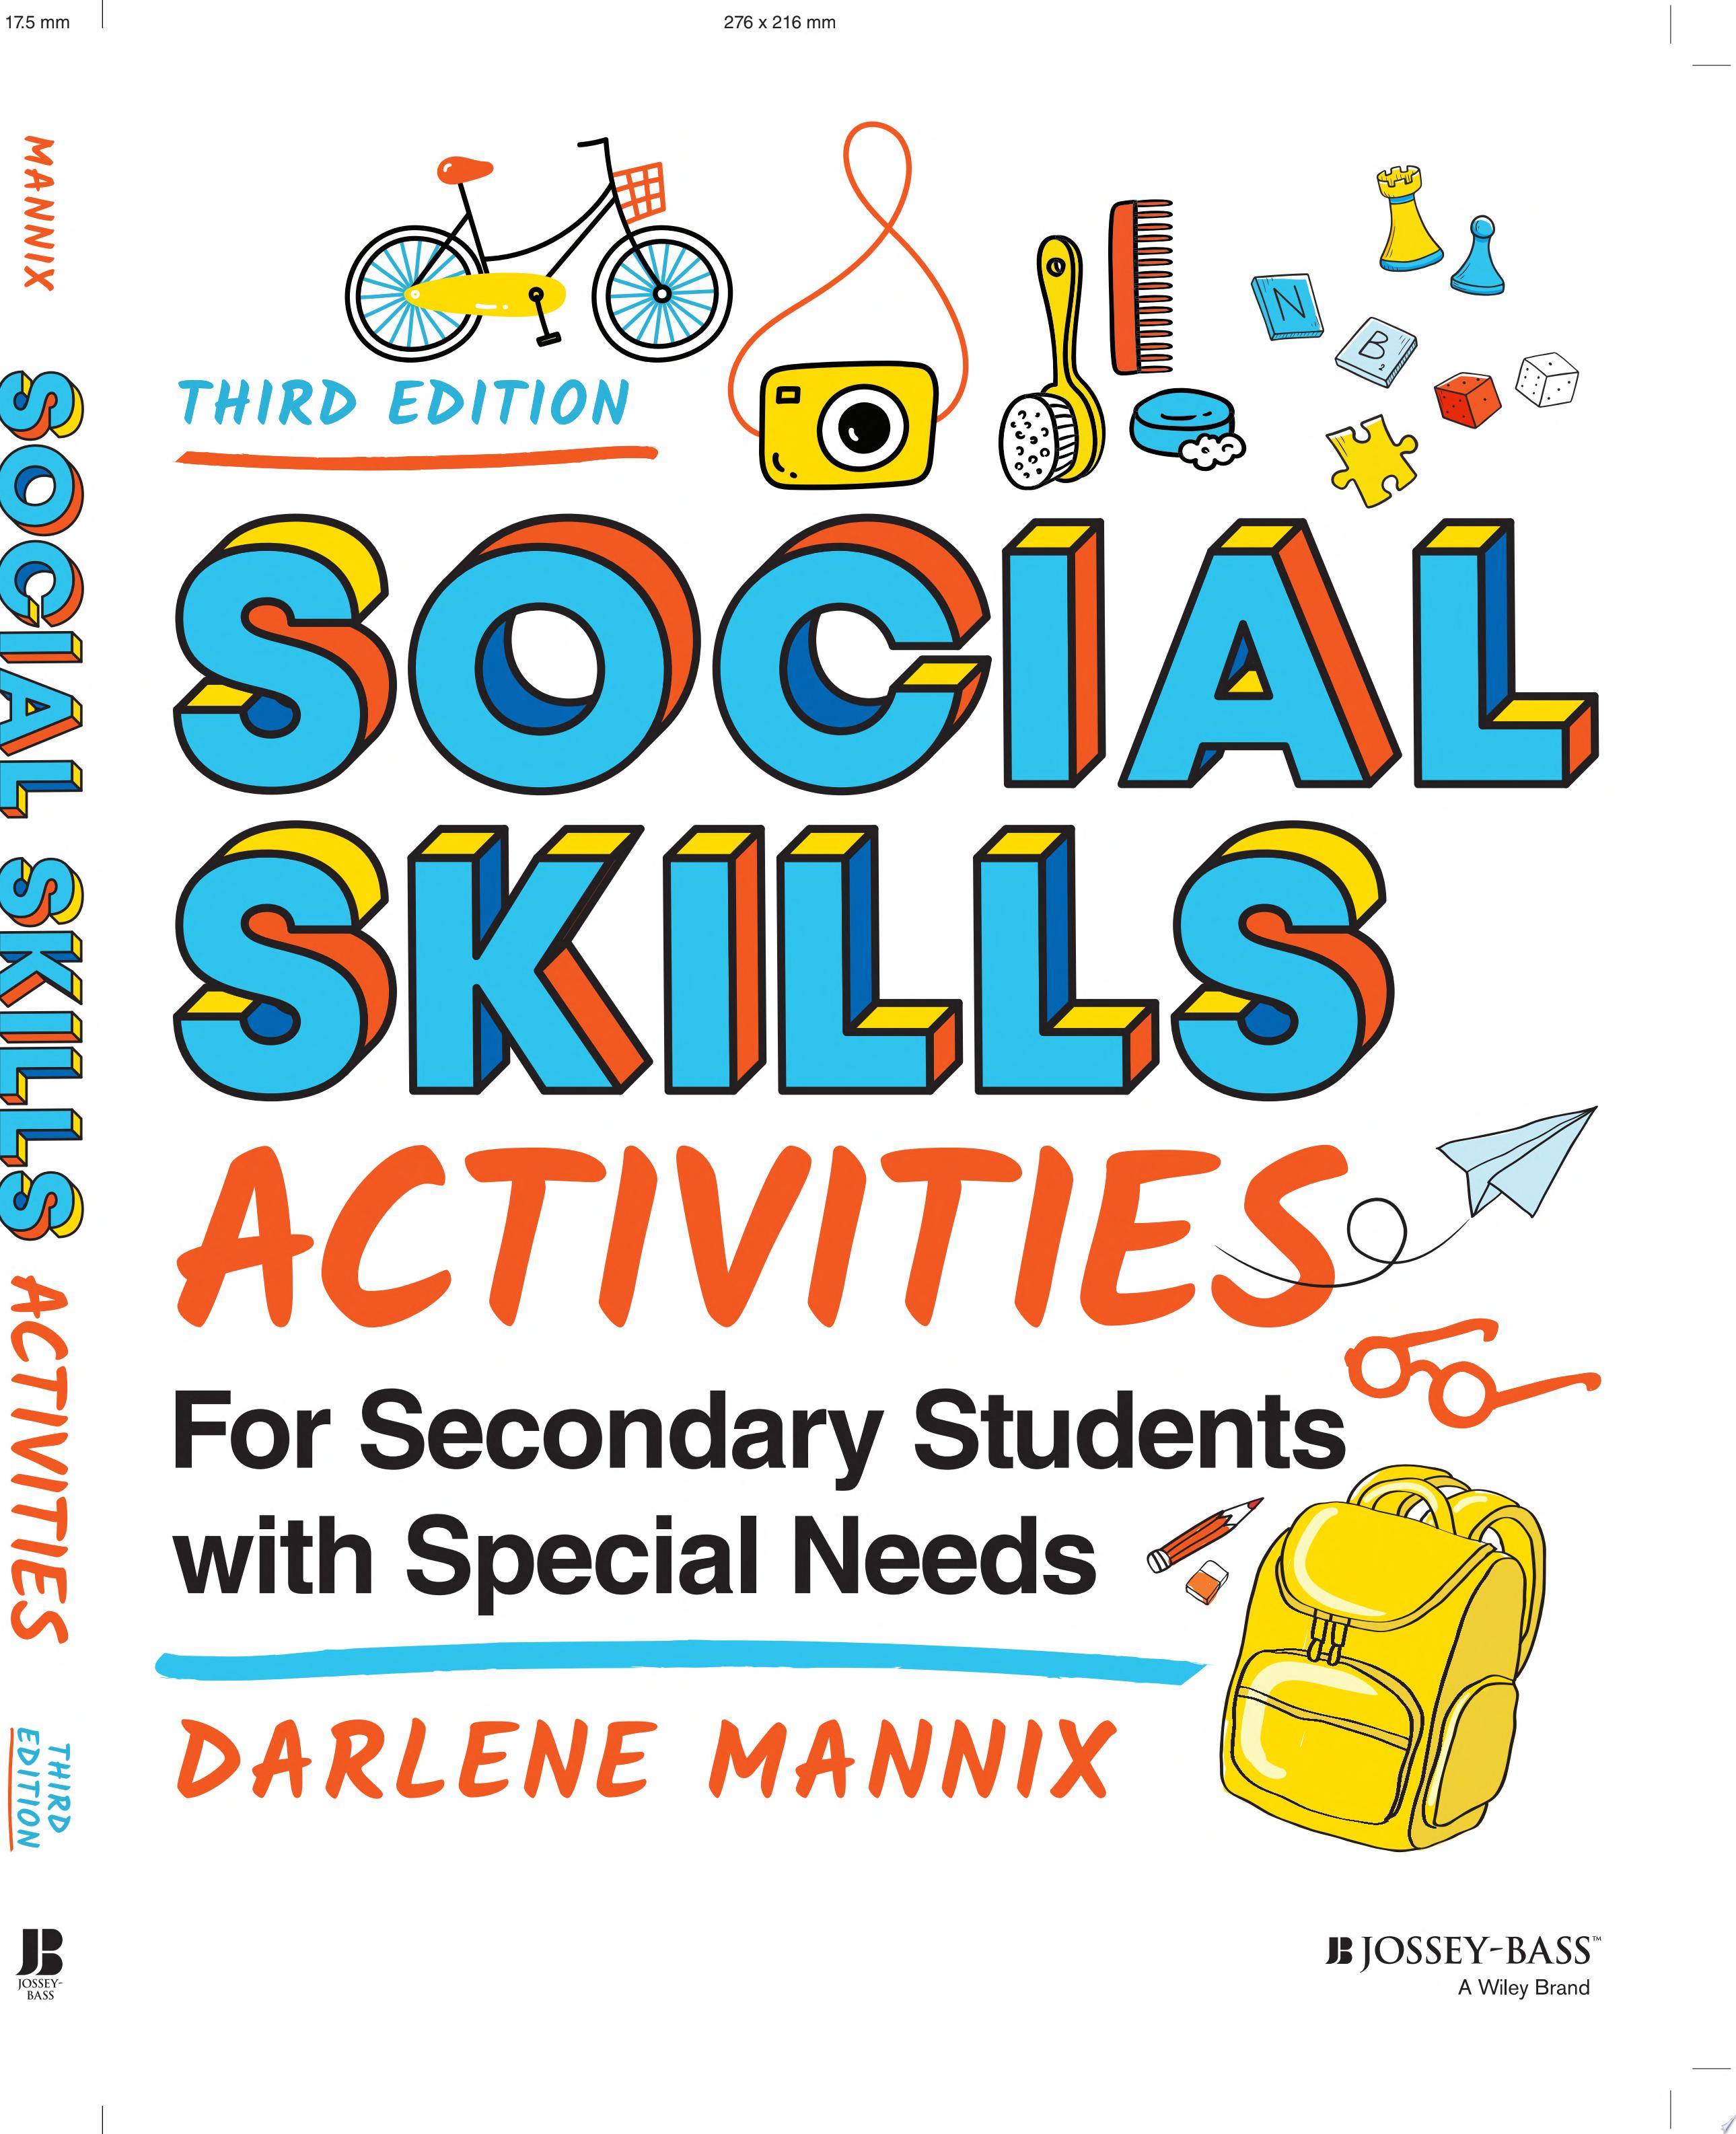 Image for "Social Skills Activities for Secondary Students with Special Needs"